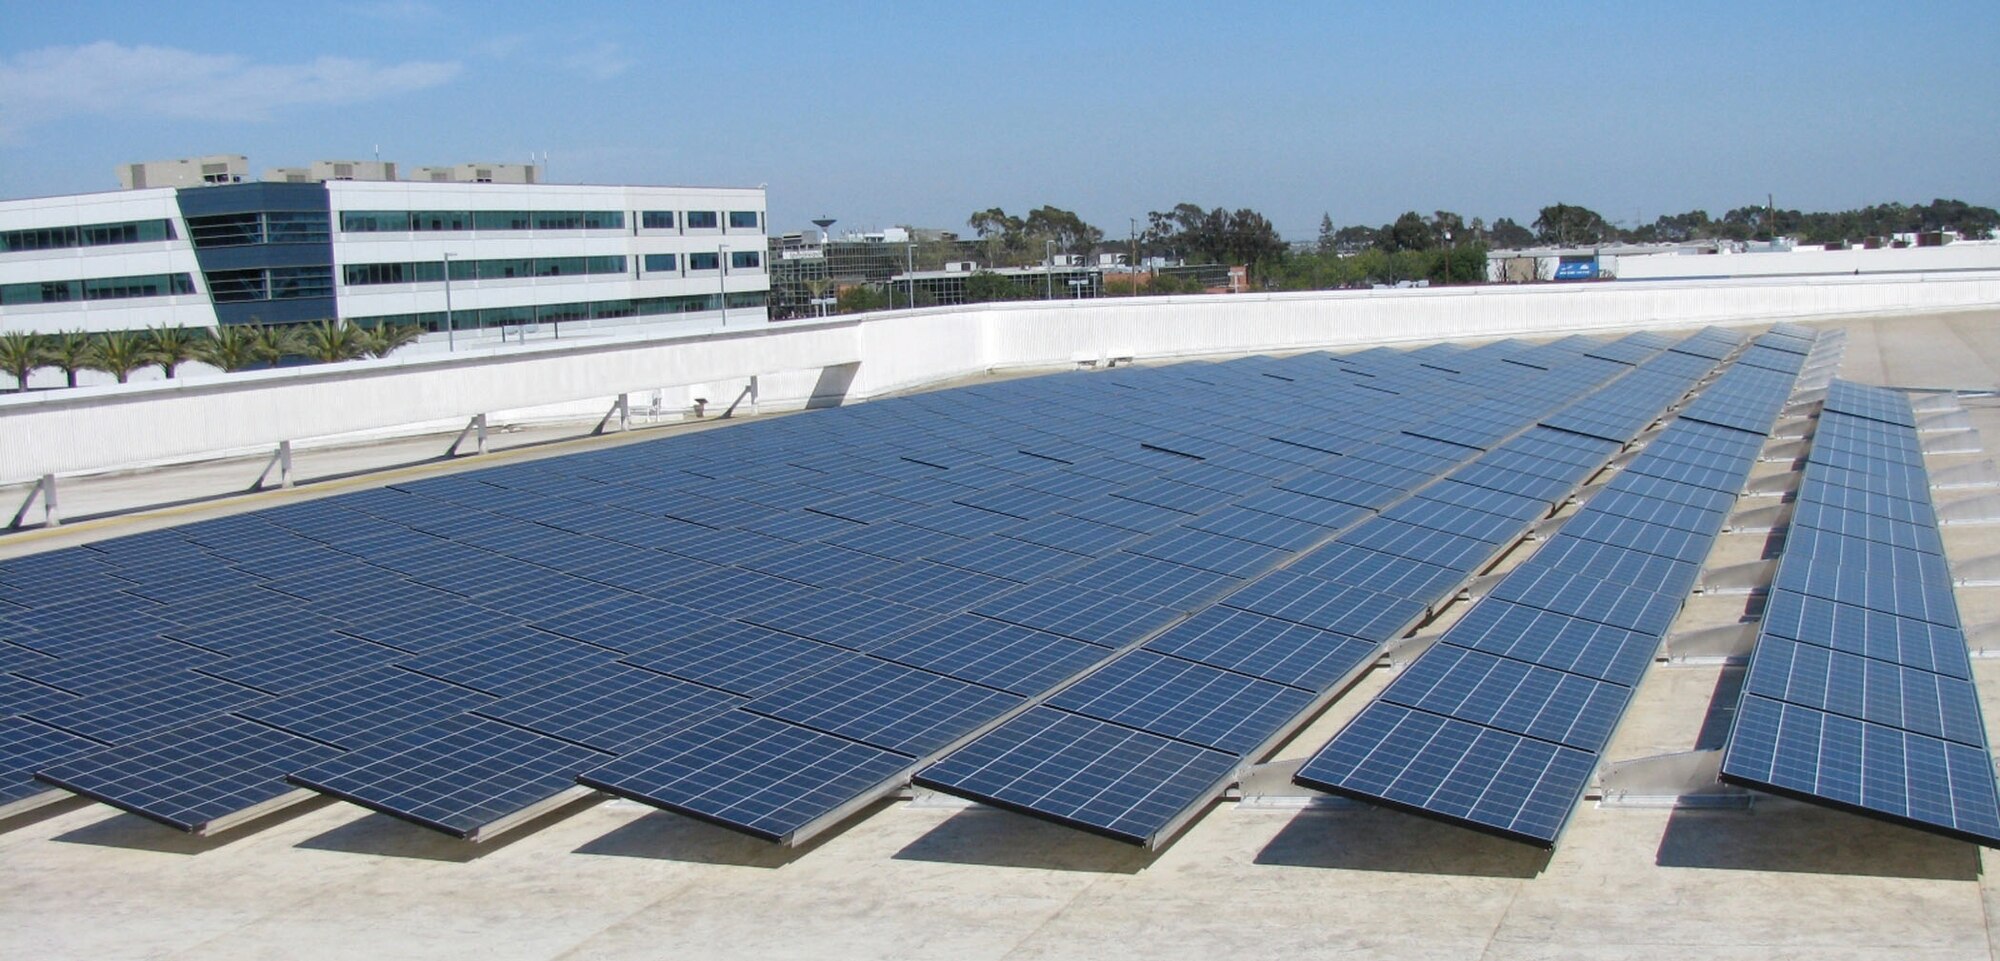 Four hundred solar panels on the roof of the commissary at Los Angeles Air Force Base collect energy to partially power the military grocery store’s energy requirements. The photovoltaic system was activated for testing and evaluation in mid-April and will be dedicated on May 28. (Photo by Rick Degraffenreid, ITSI)